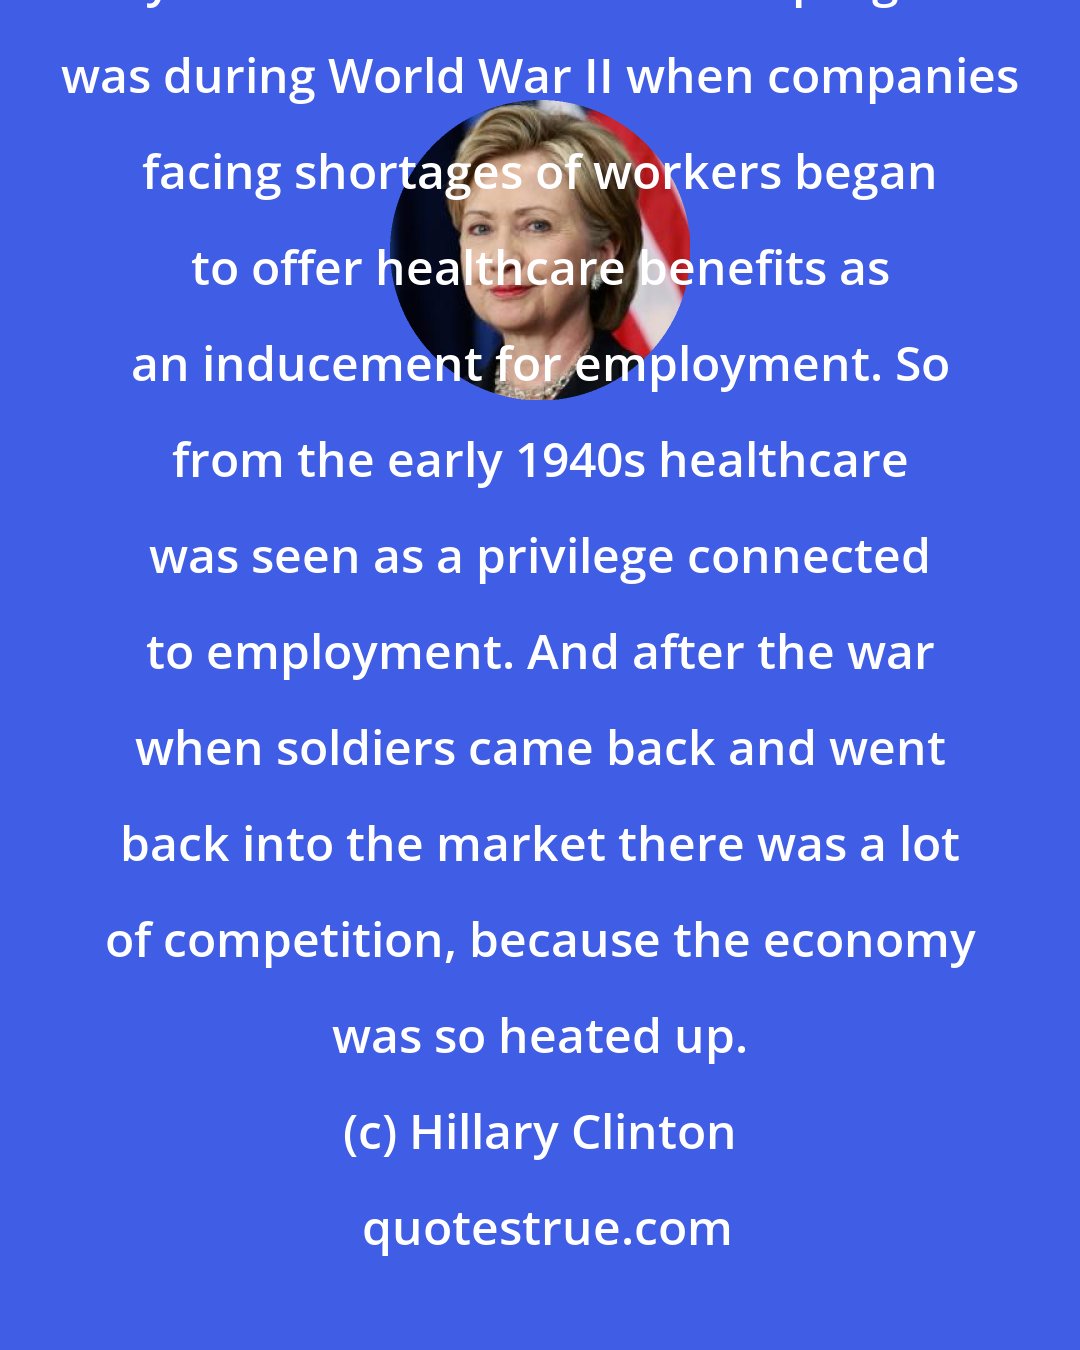 Hillary Clinton: On healthcare we are the prisoner of our past. The way we got to develop any kind of medical insurance program was during World War II when companies facing shortages of workers began to offer healthcare benefits as an inducement for employment. So from the early 1940s healthcare was seen as a privilege connected to employment. And after the war when soldiers came back and went back into the market there was a lot of competition, because the economy was so heated up.